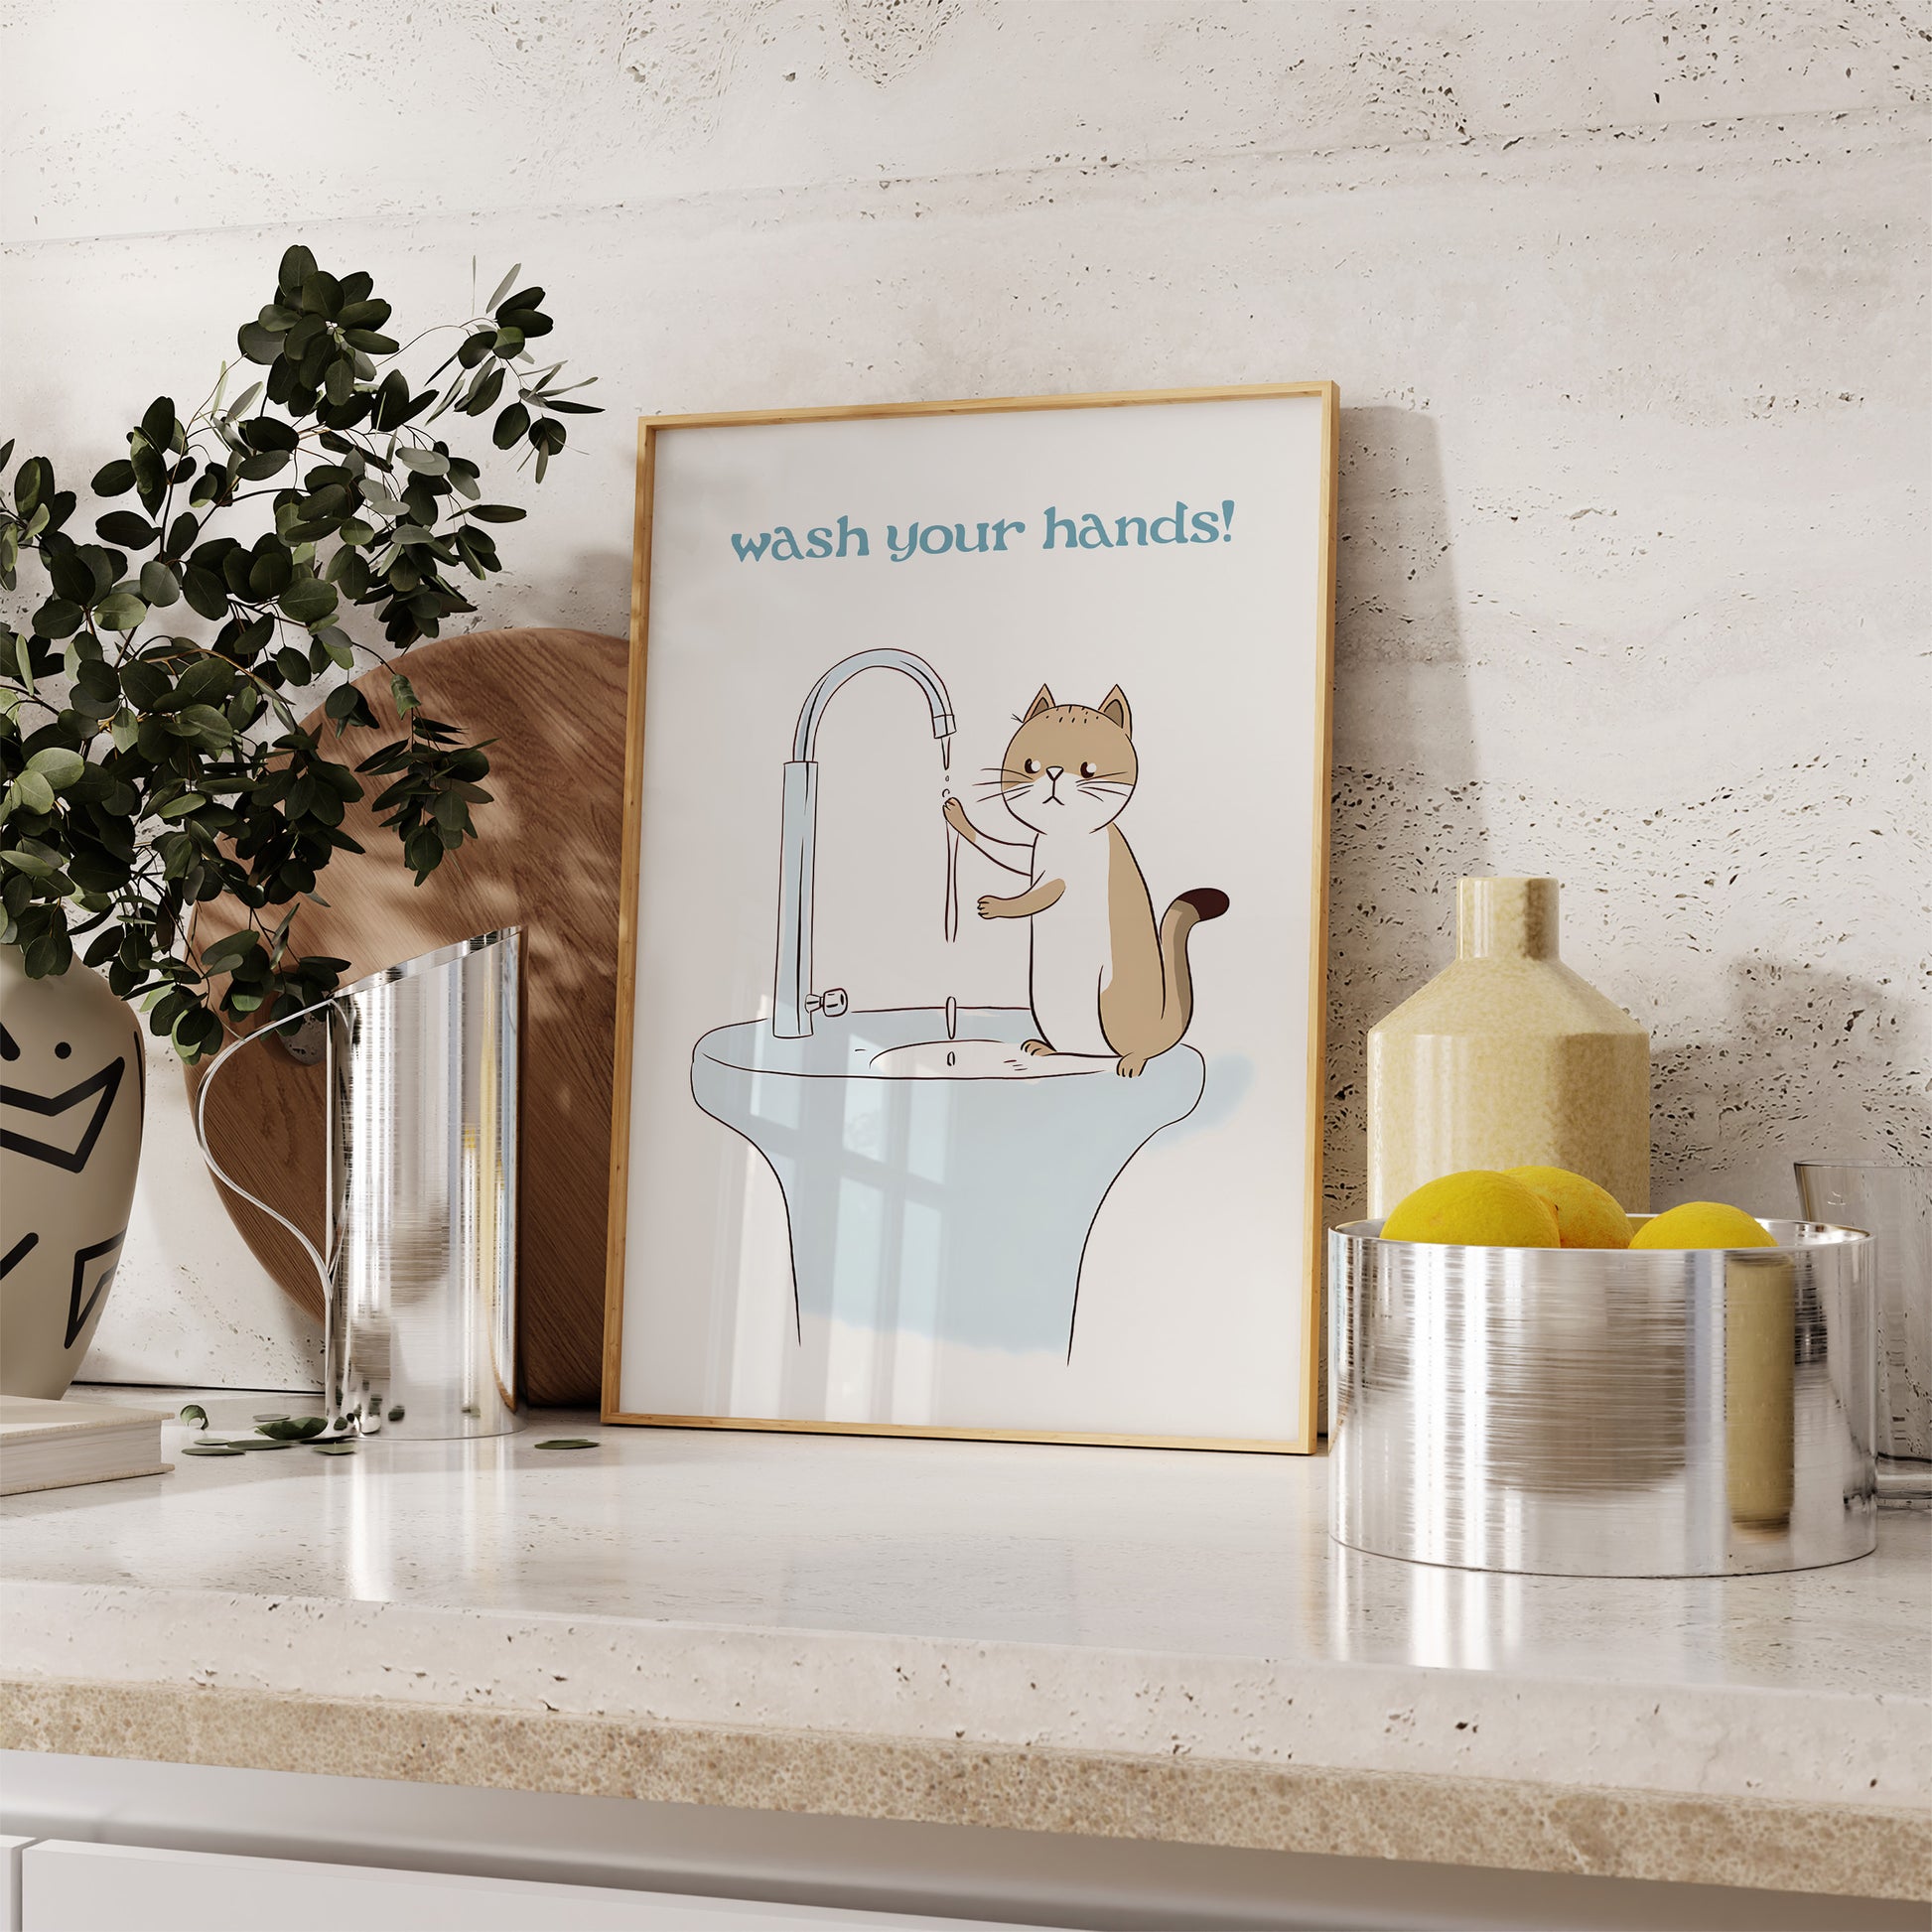 A framed poster with a cartoon cat at a sink and "wash your hands!" text, placed on a kitchen counter.